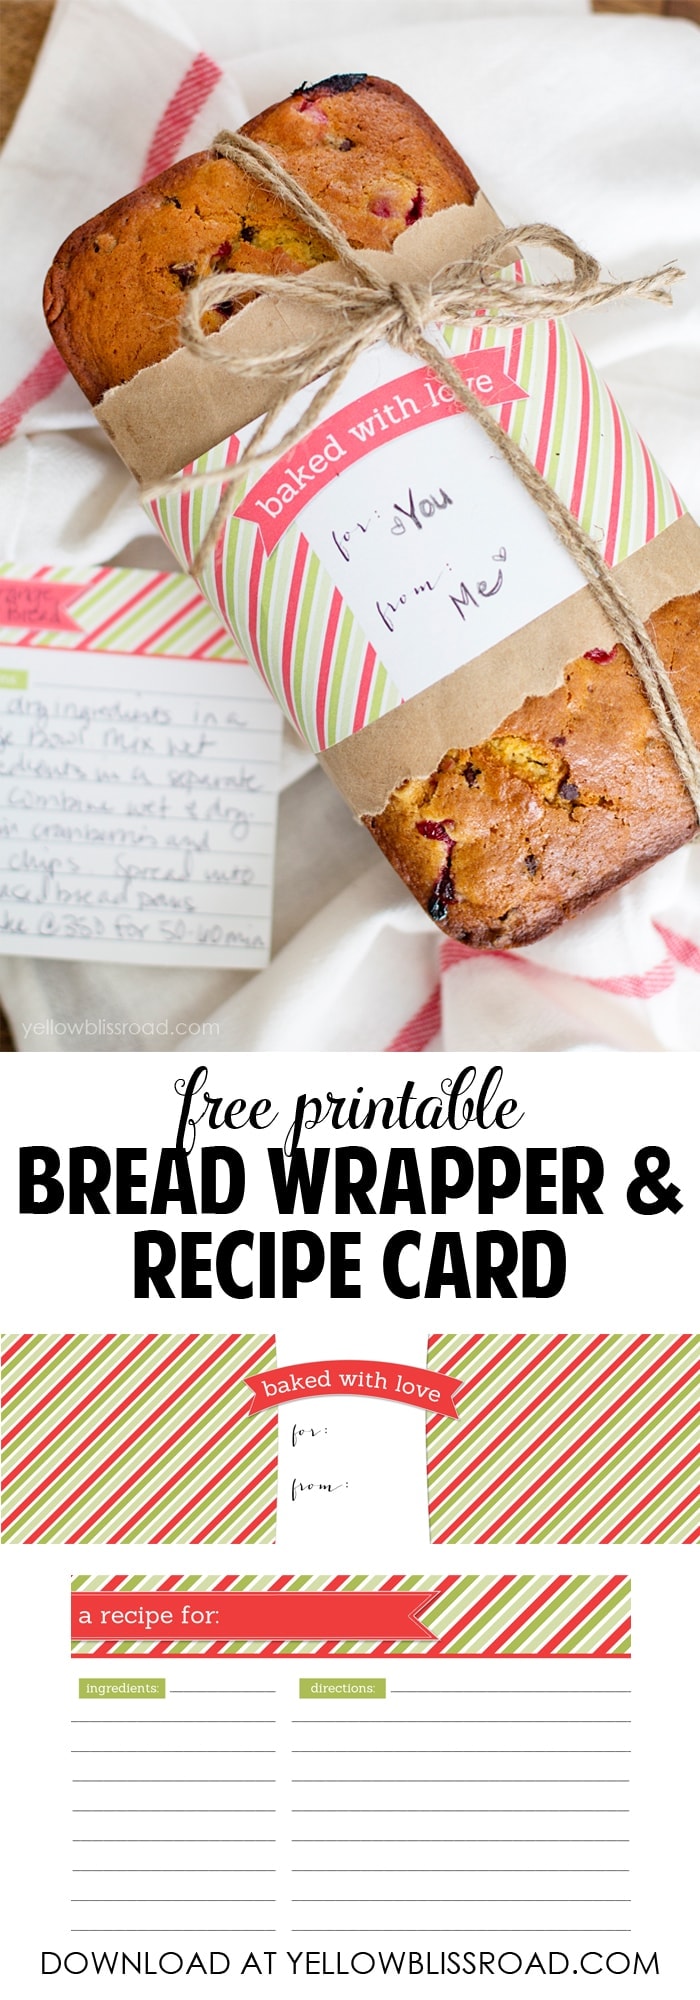 Free Printable Bread Gift Wrapper and Recipe Card - What a cute way to present a baked gift!